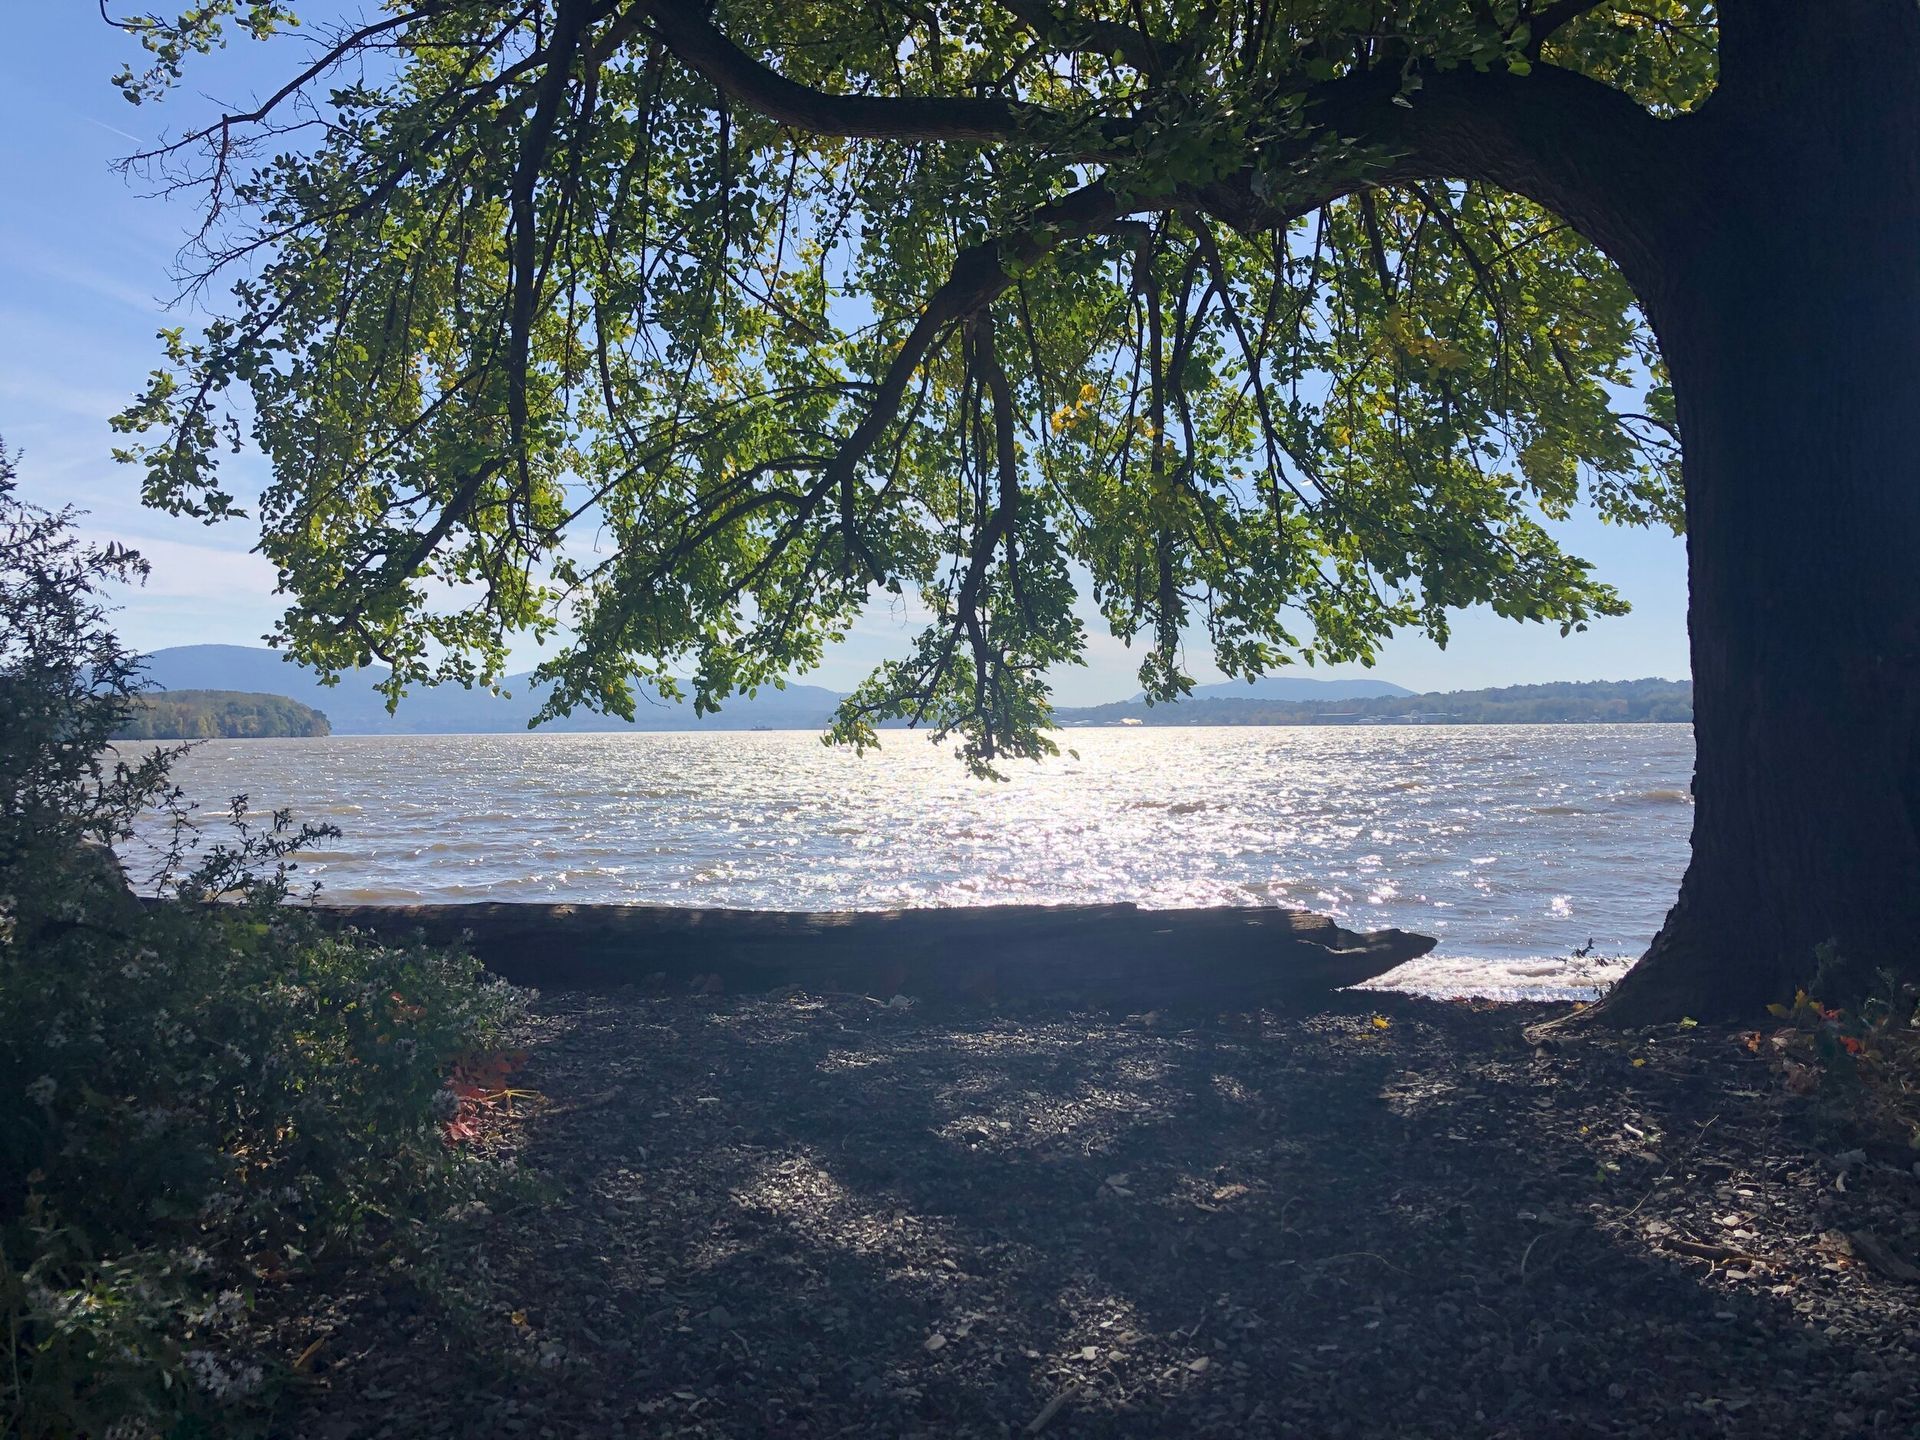 A tree overlooking a body of water on a sunny day